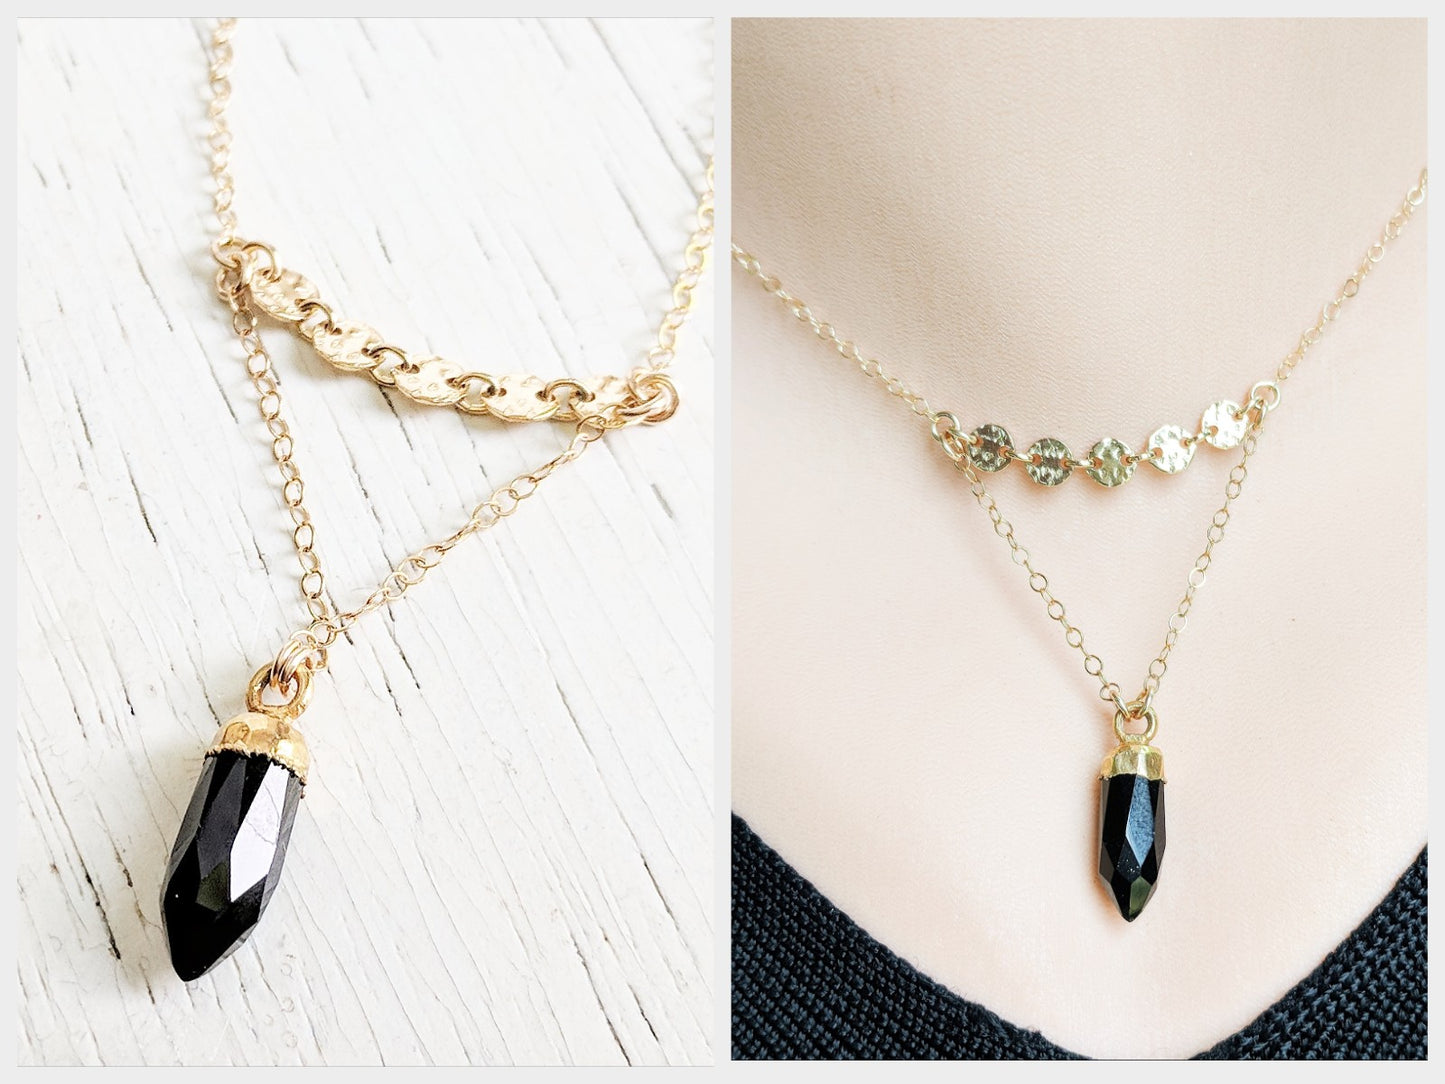 Onyx 14k Gold Sequin Layer Necklace - As Seen On CBS "God Friended Me" - Worn by Abby Awe as Lucy Season 1 Episode 7